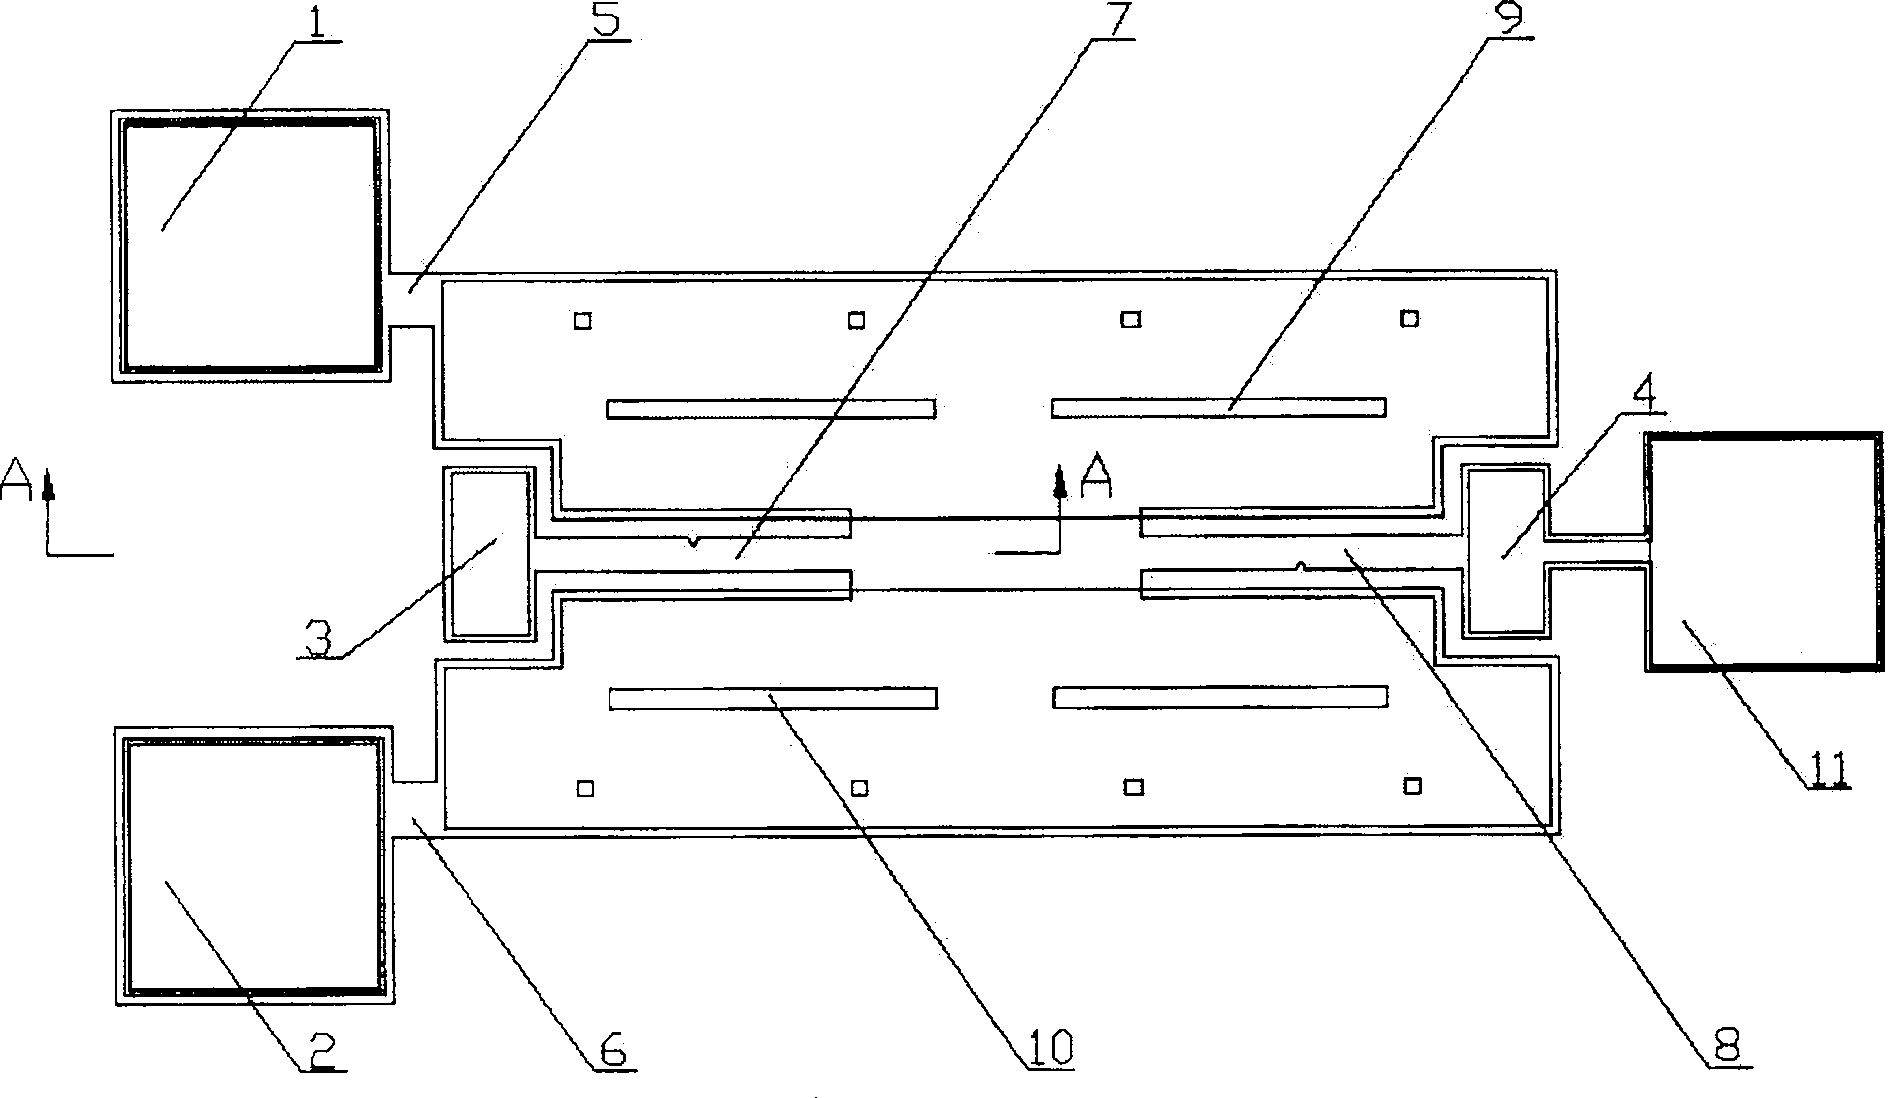 Micro-structure twist fatigue testing apparatus driven by parallel plate capacitance